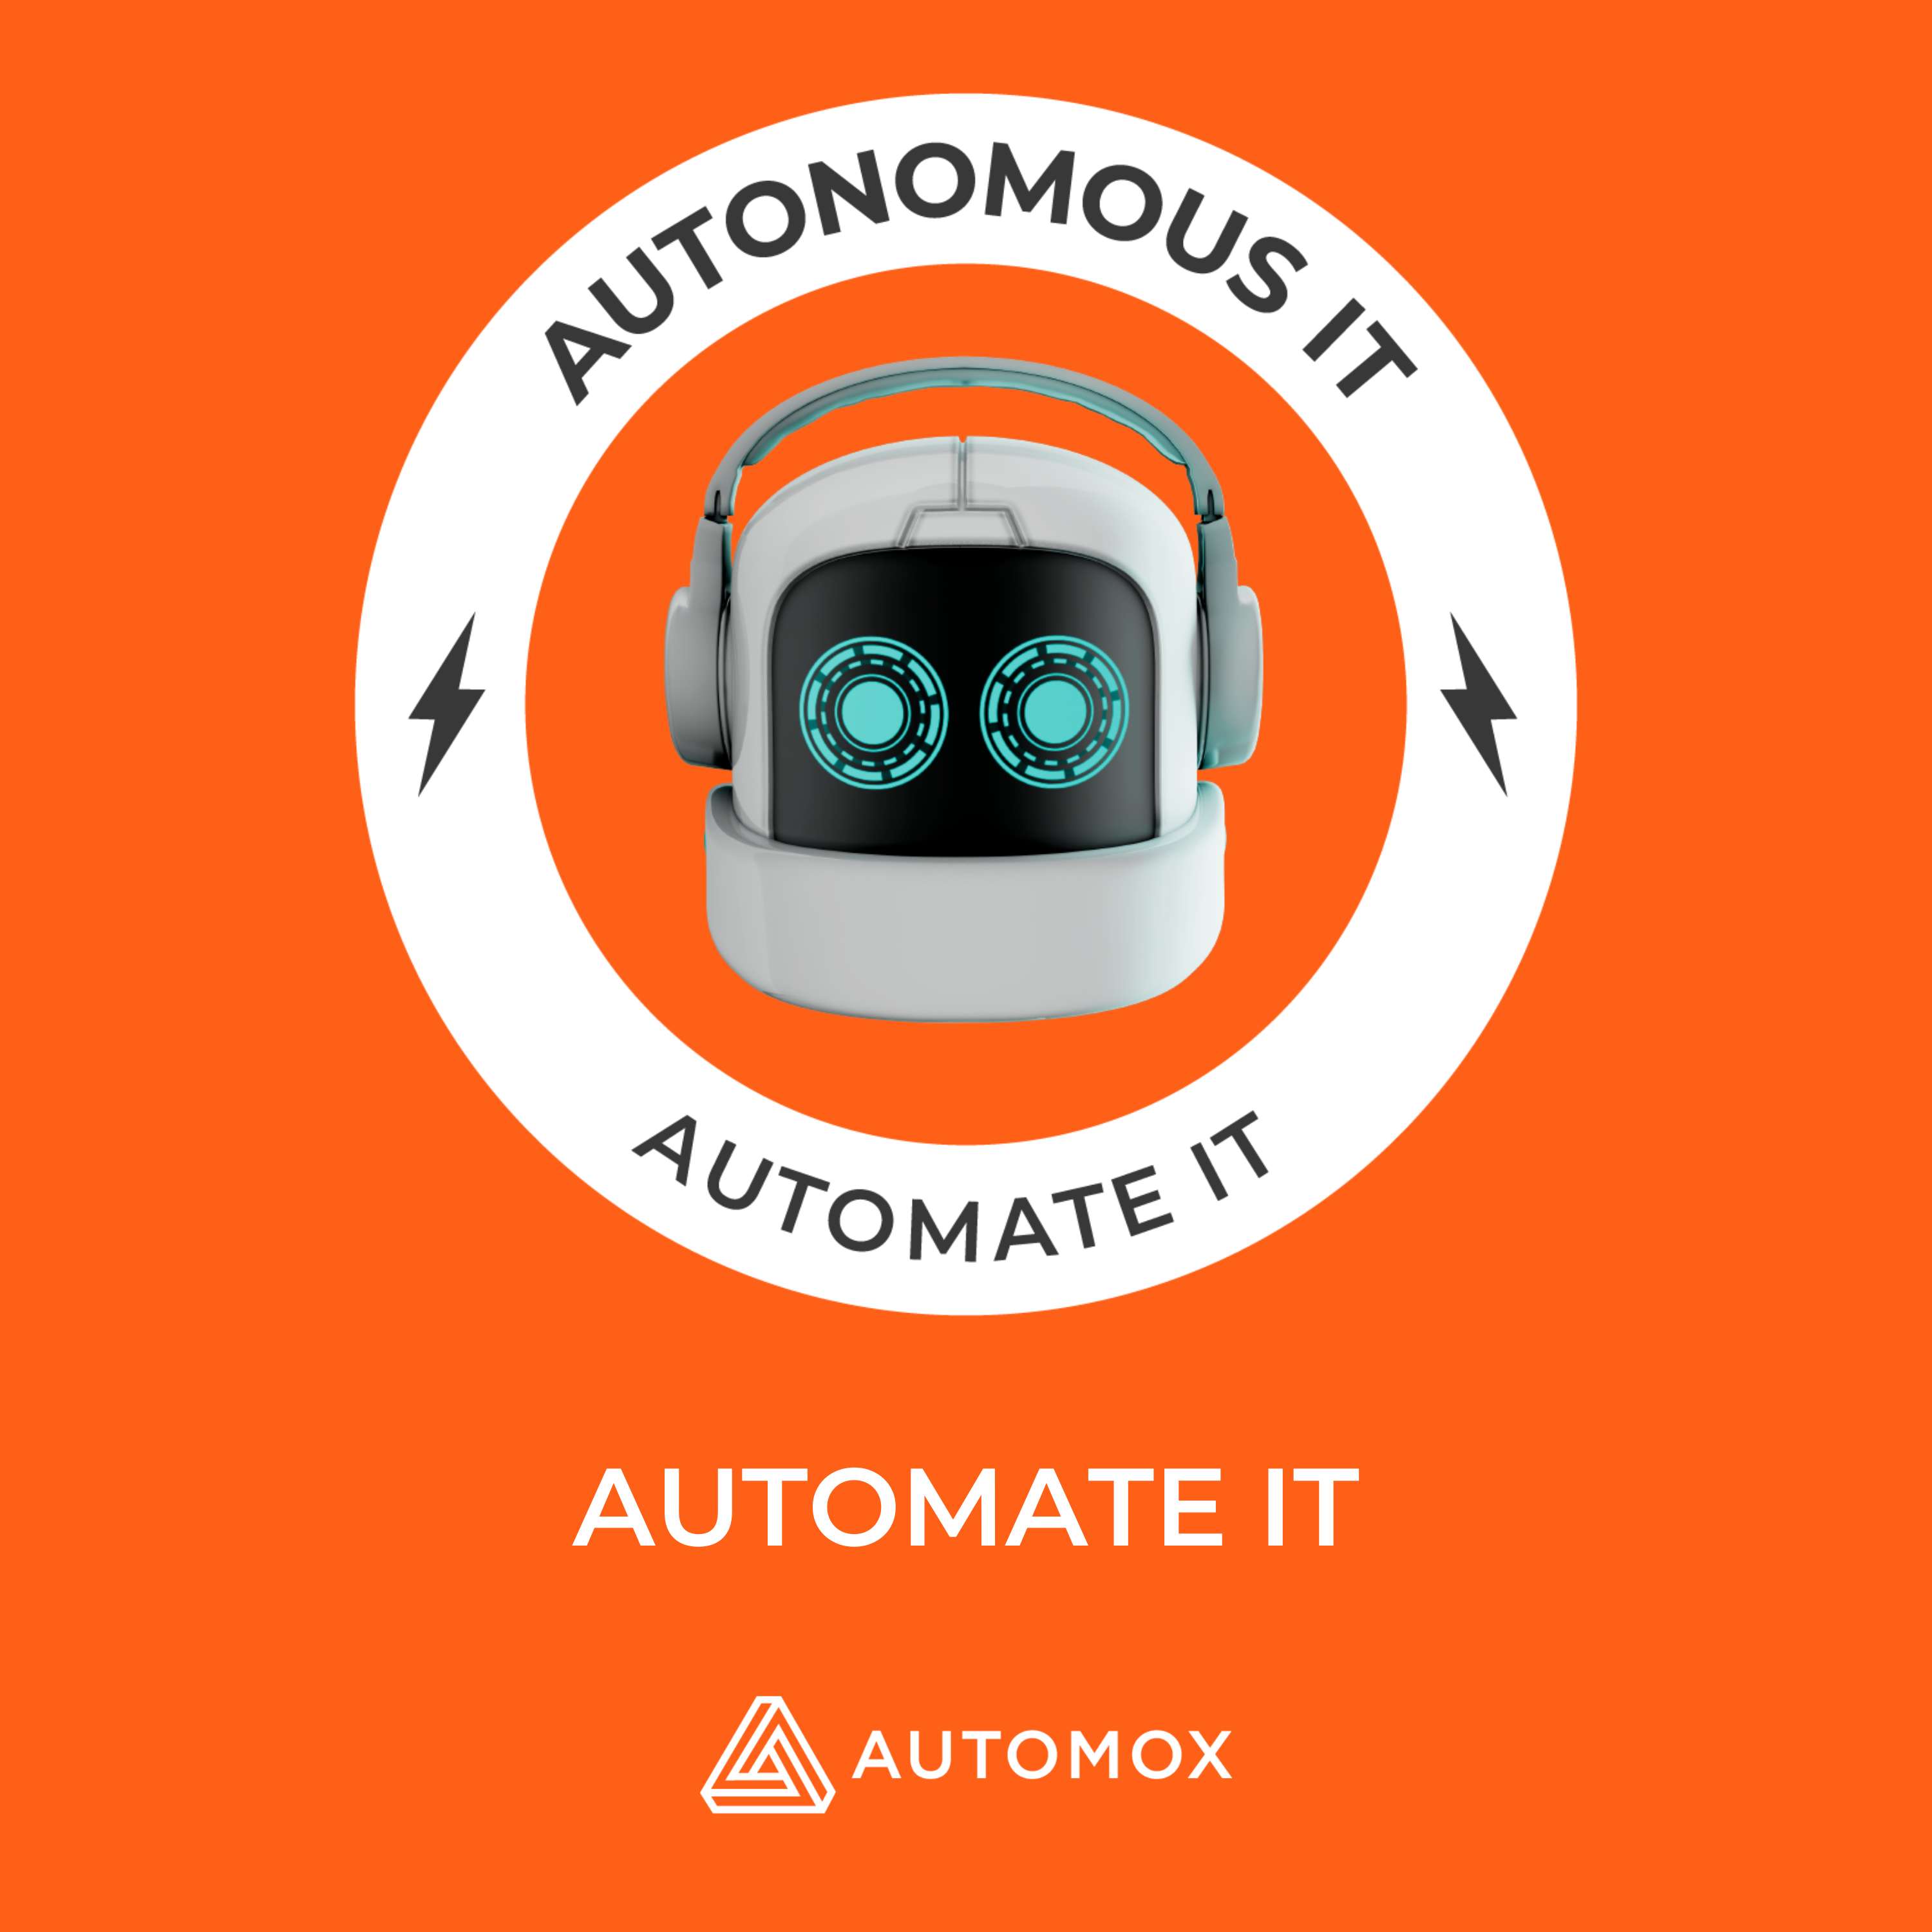 Automate IT – Easier Than Legos: How Automox Automates IT With Automox, E07